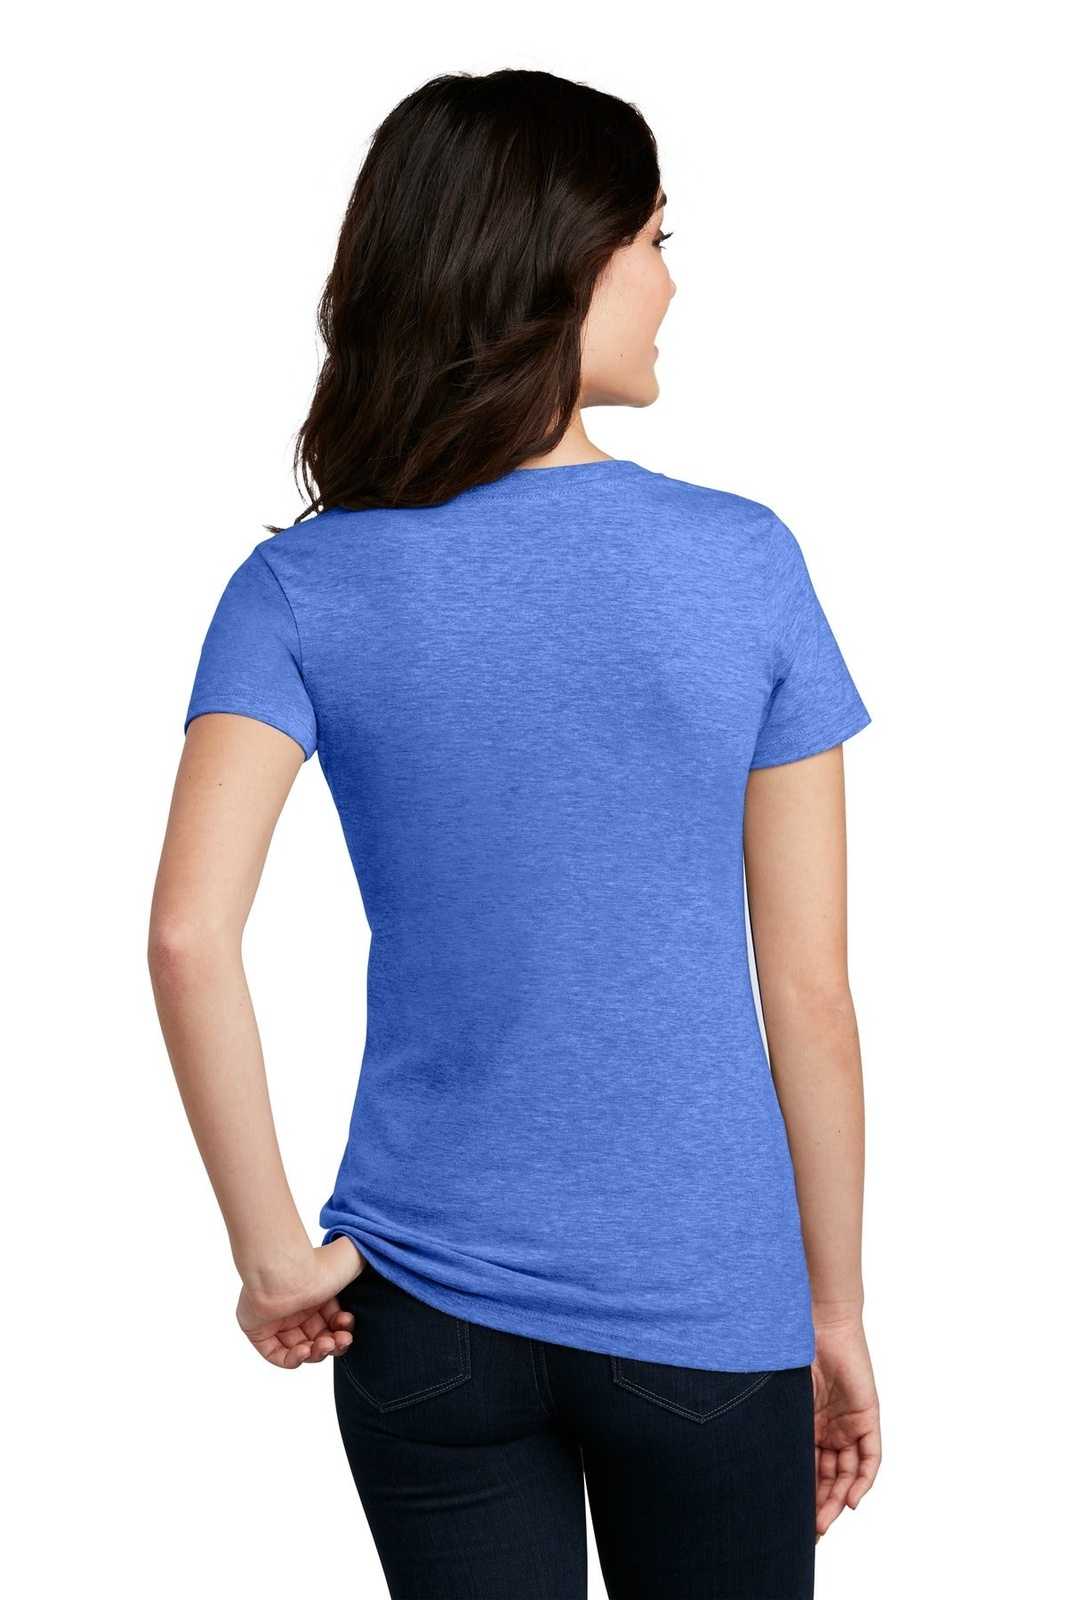 District DM1190L Women's Perfect Blend V-Neck Tee - Heathered Royal - HIT a Double - 1